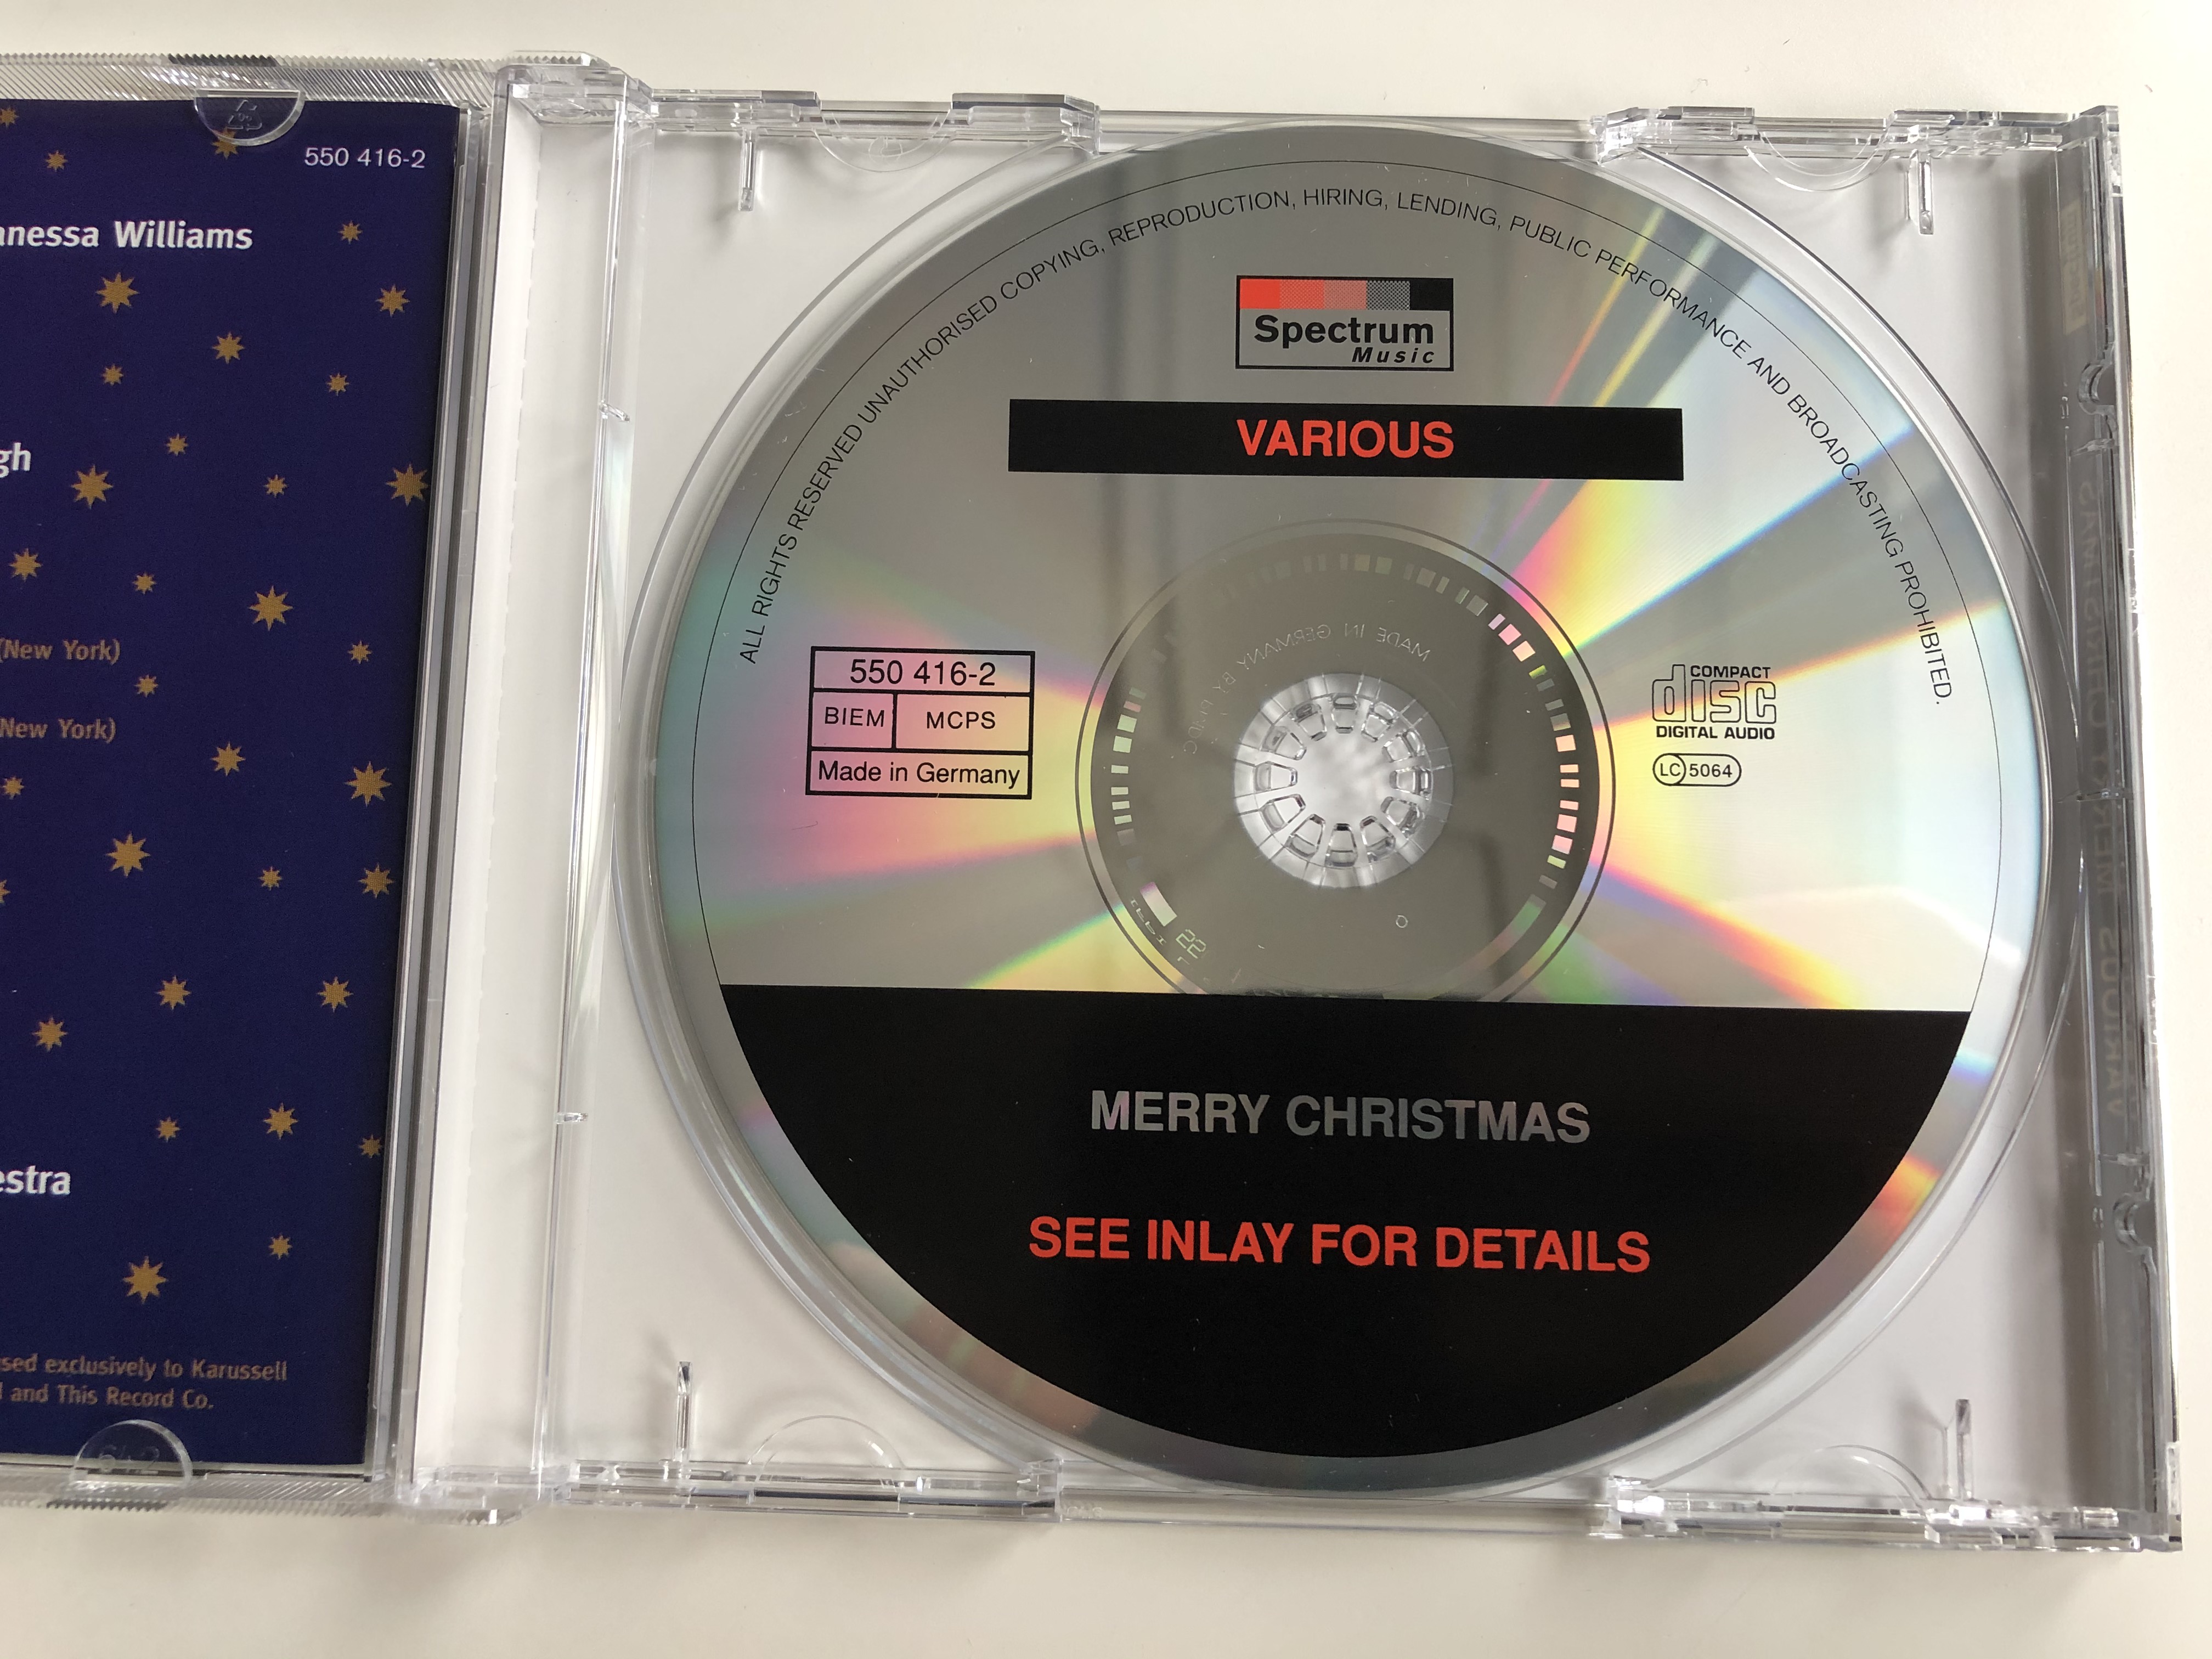 merry-christmas-from-band-aid-david-essex-chris-de-burgh-elton-john-and-others-karussell-audio-cd-1994-550-416-2-3-.jpg